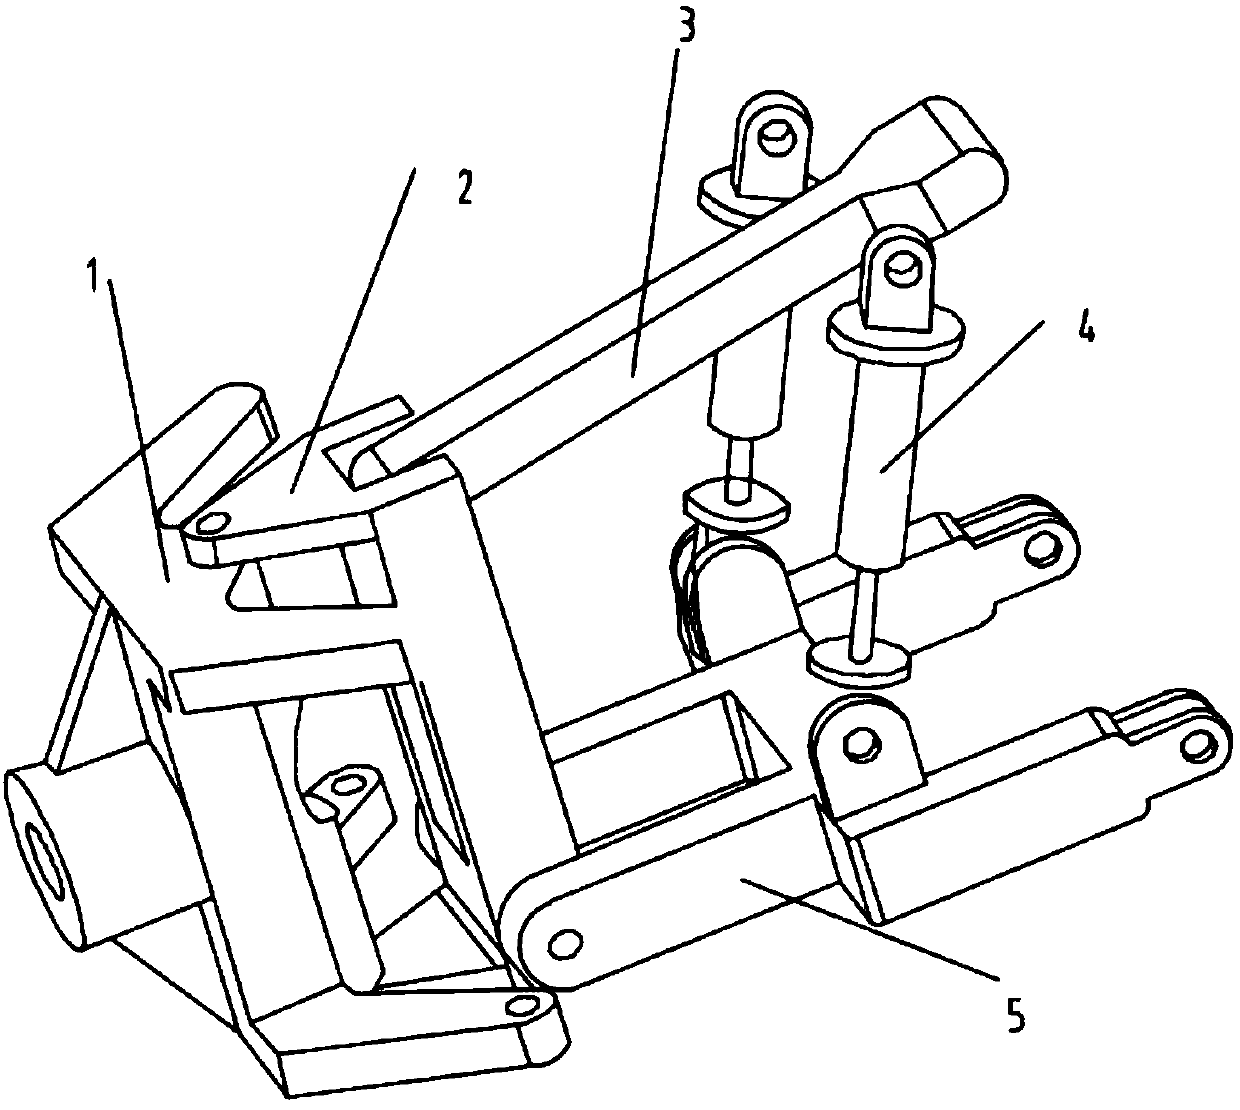 Independent suspension device of non-manned trolley